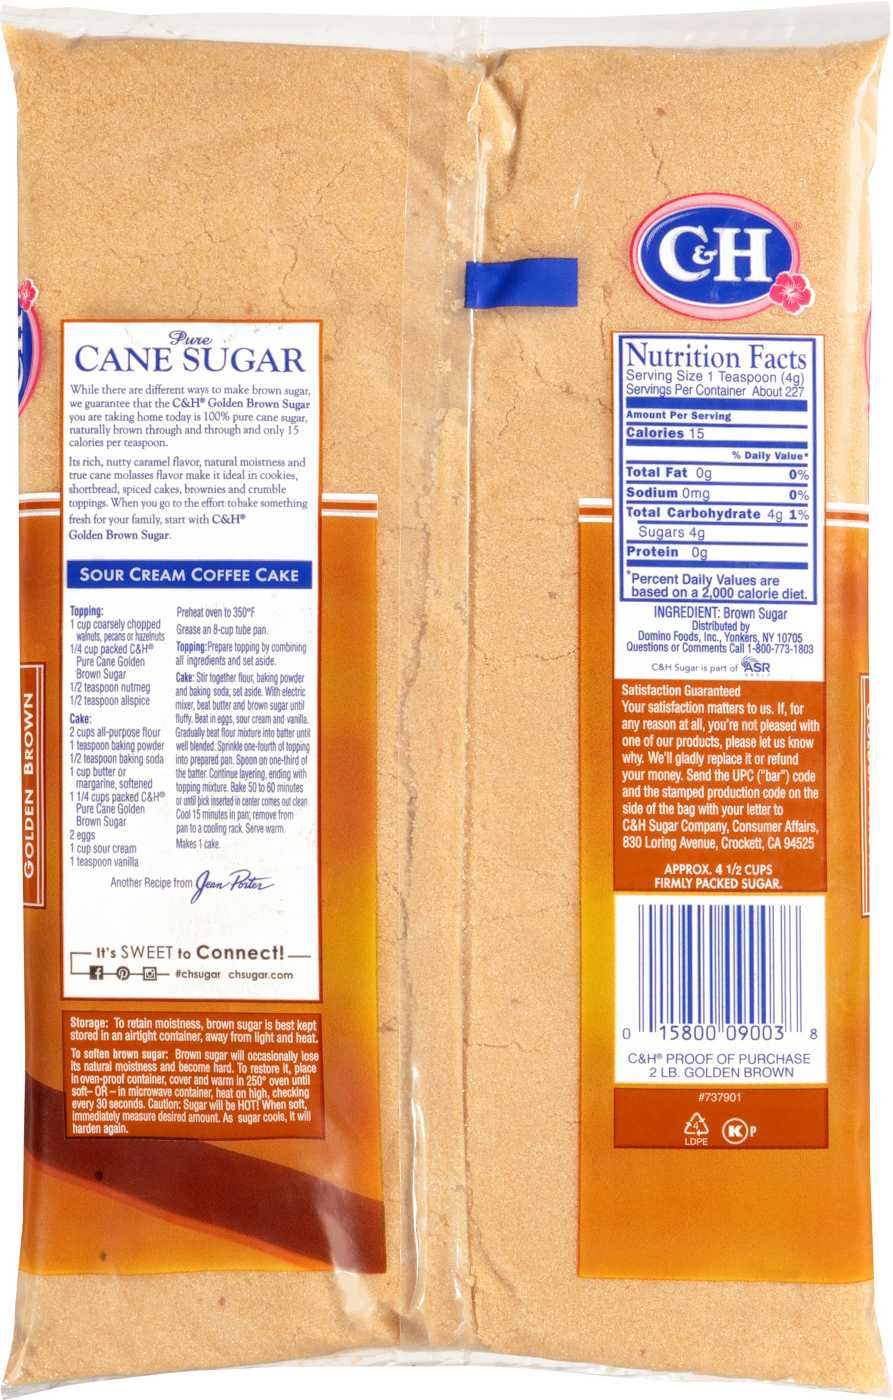 C&H Golden Brown Pure Cane Sugar; image 2 of 2